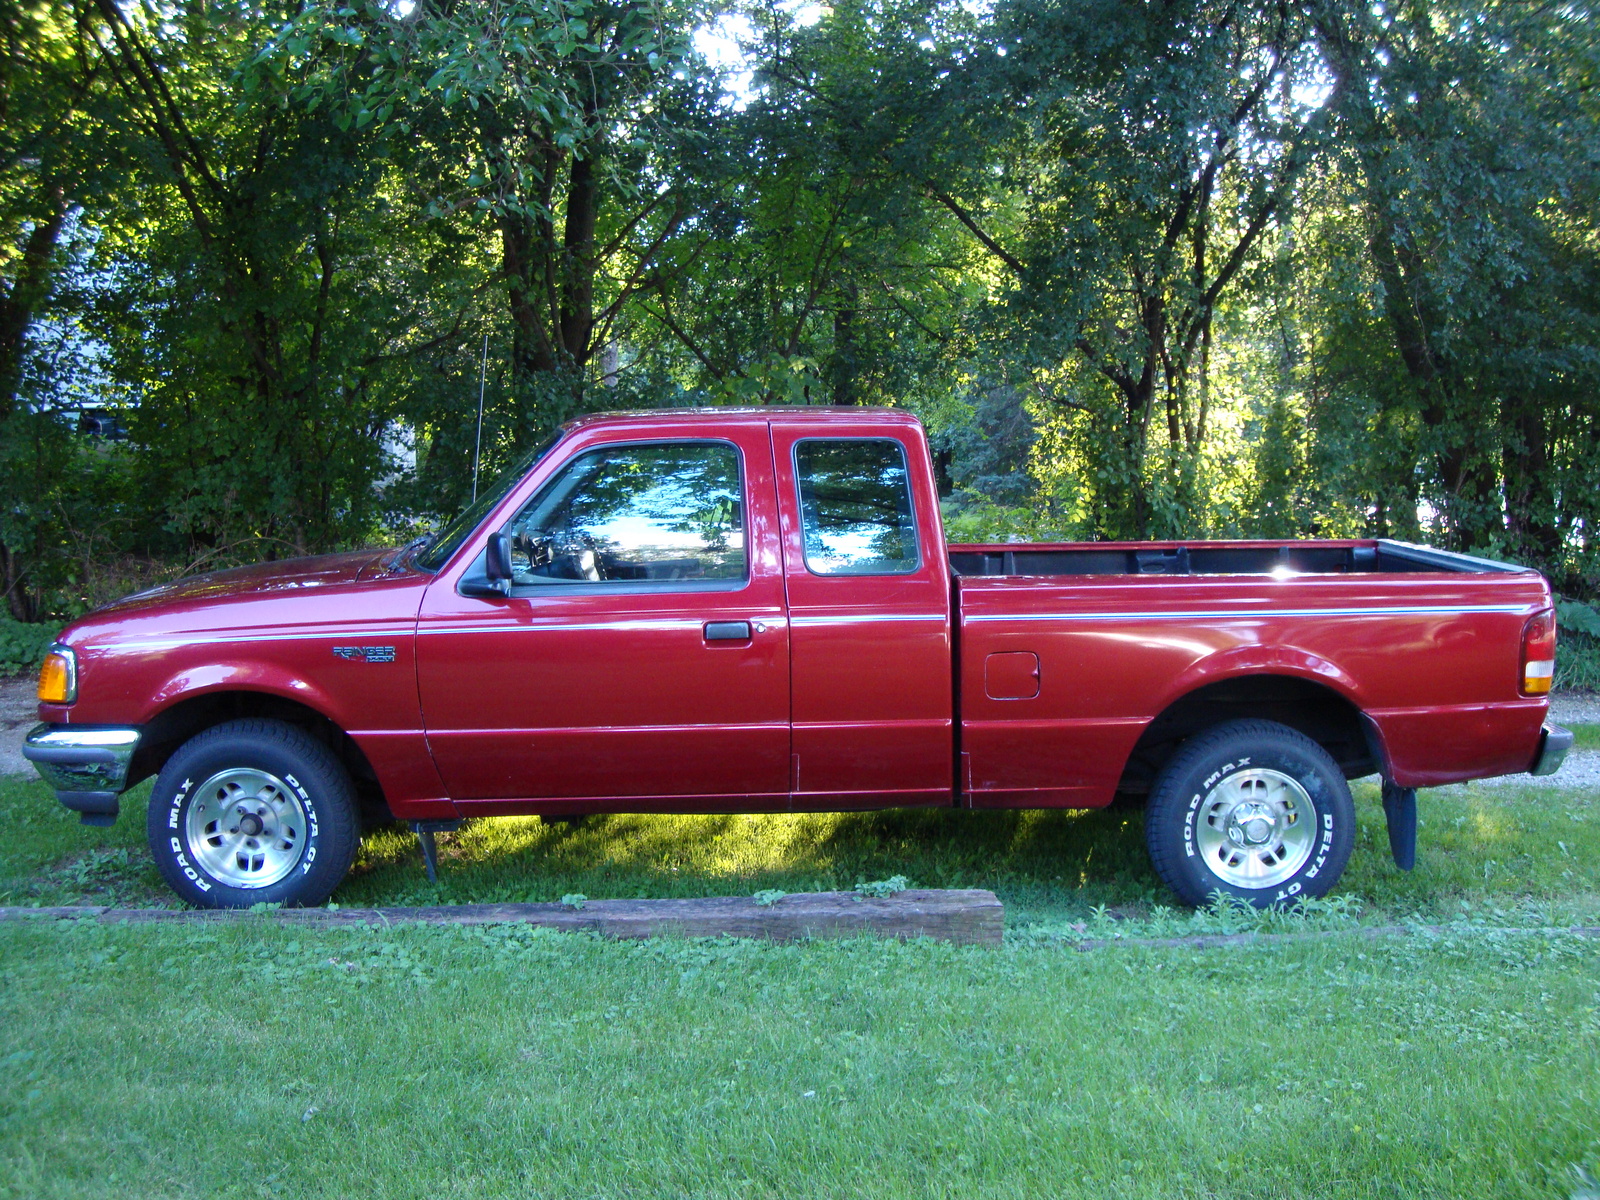 1996 Ford ranger extended cab specifications #8